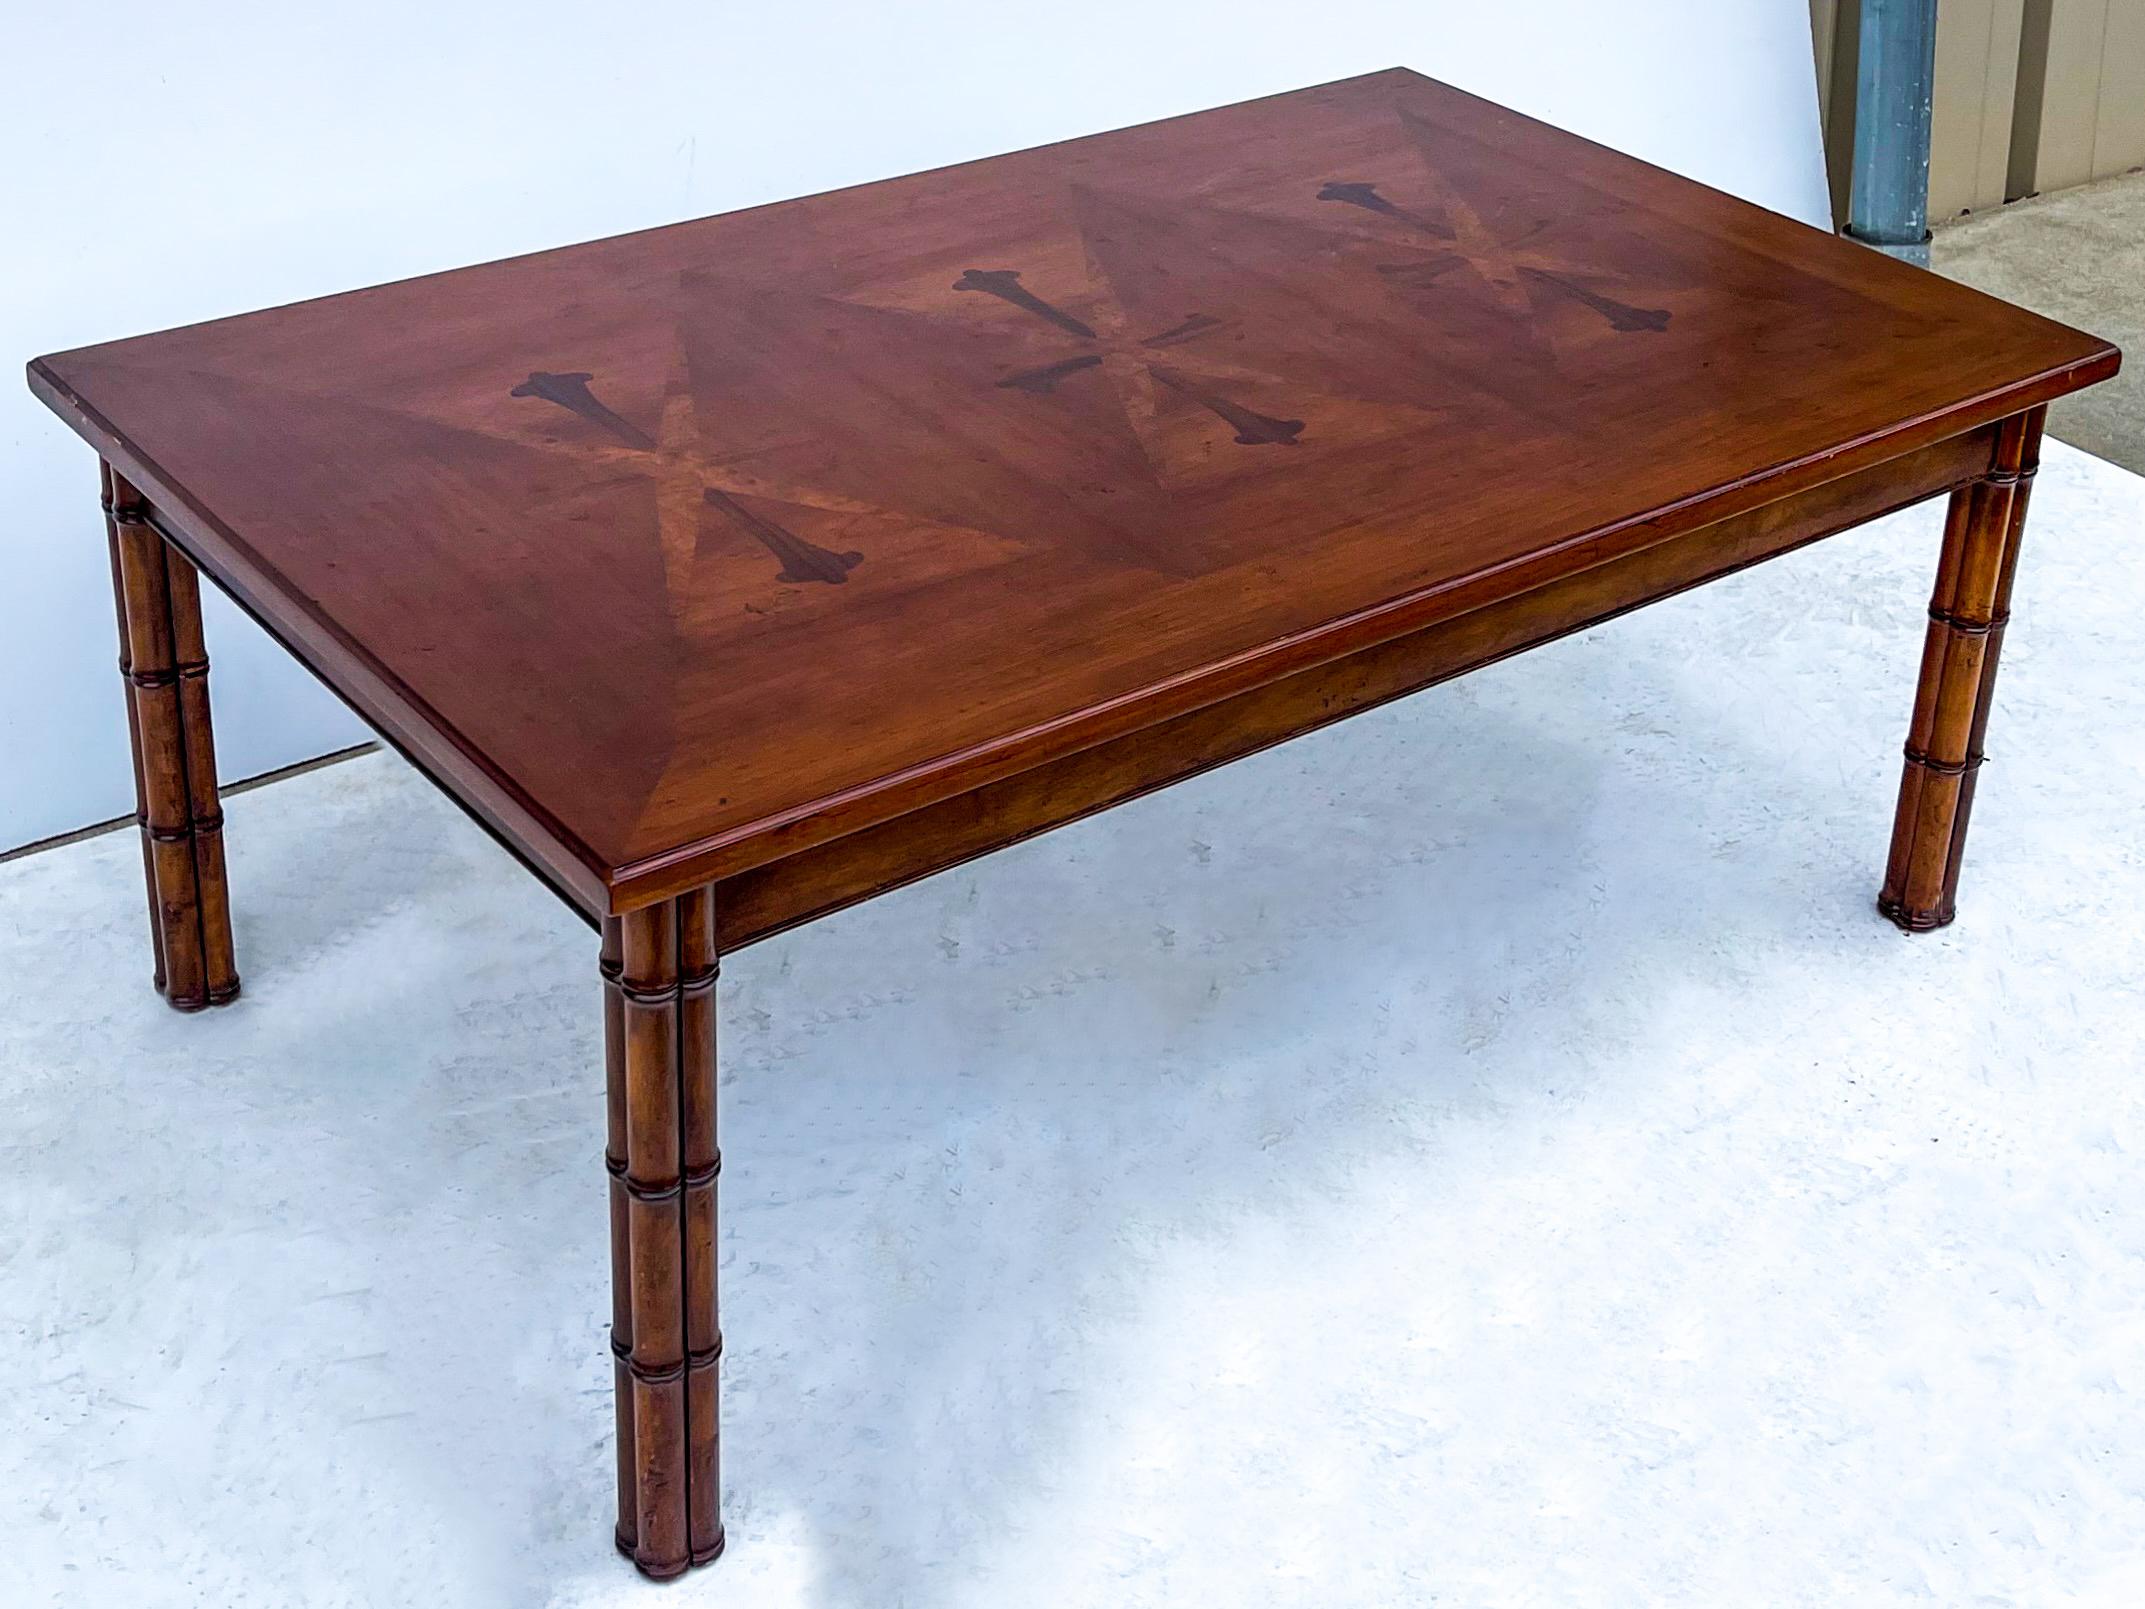 This is a 1960s regency style faux bamboo extension coffee table with rosewood inlay. It is hand hewn and has a unique almost modern look. It is unmarked and in very good condition.

My shipping is for the Continental US only.